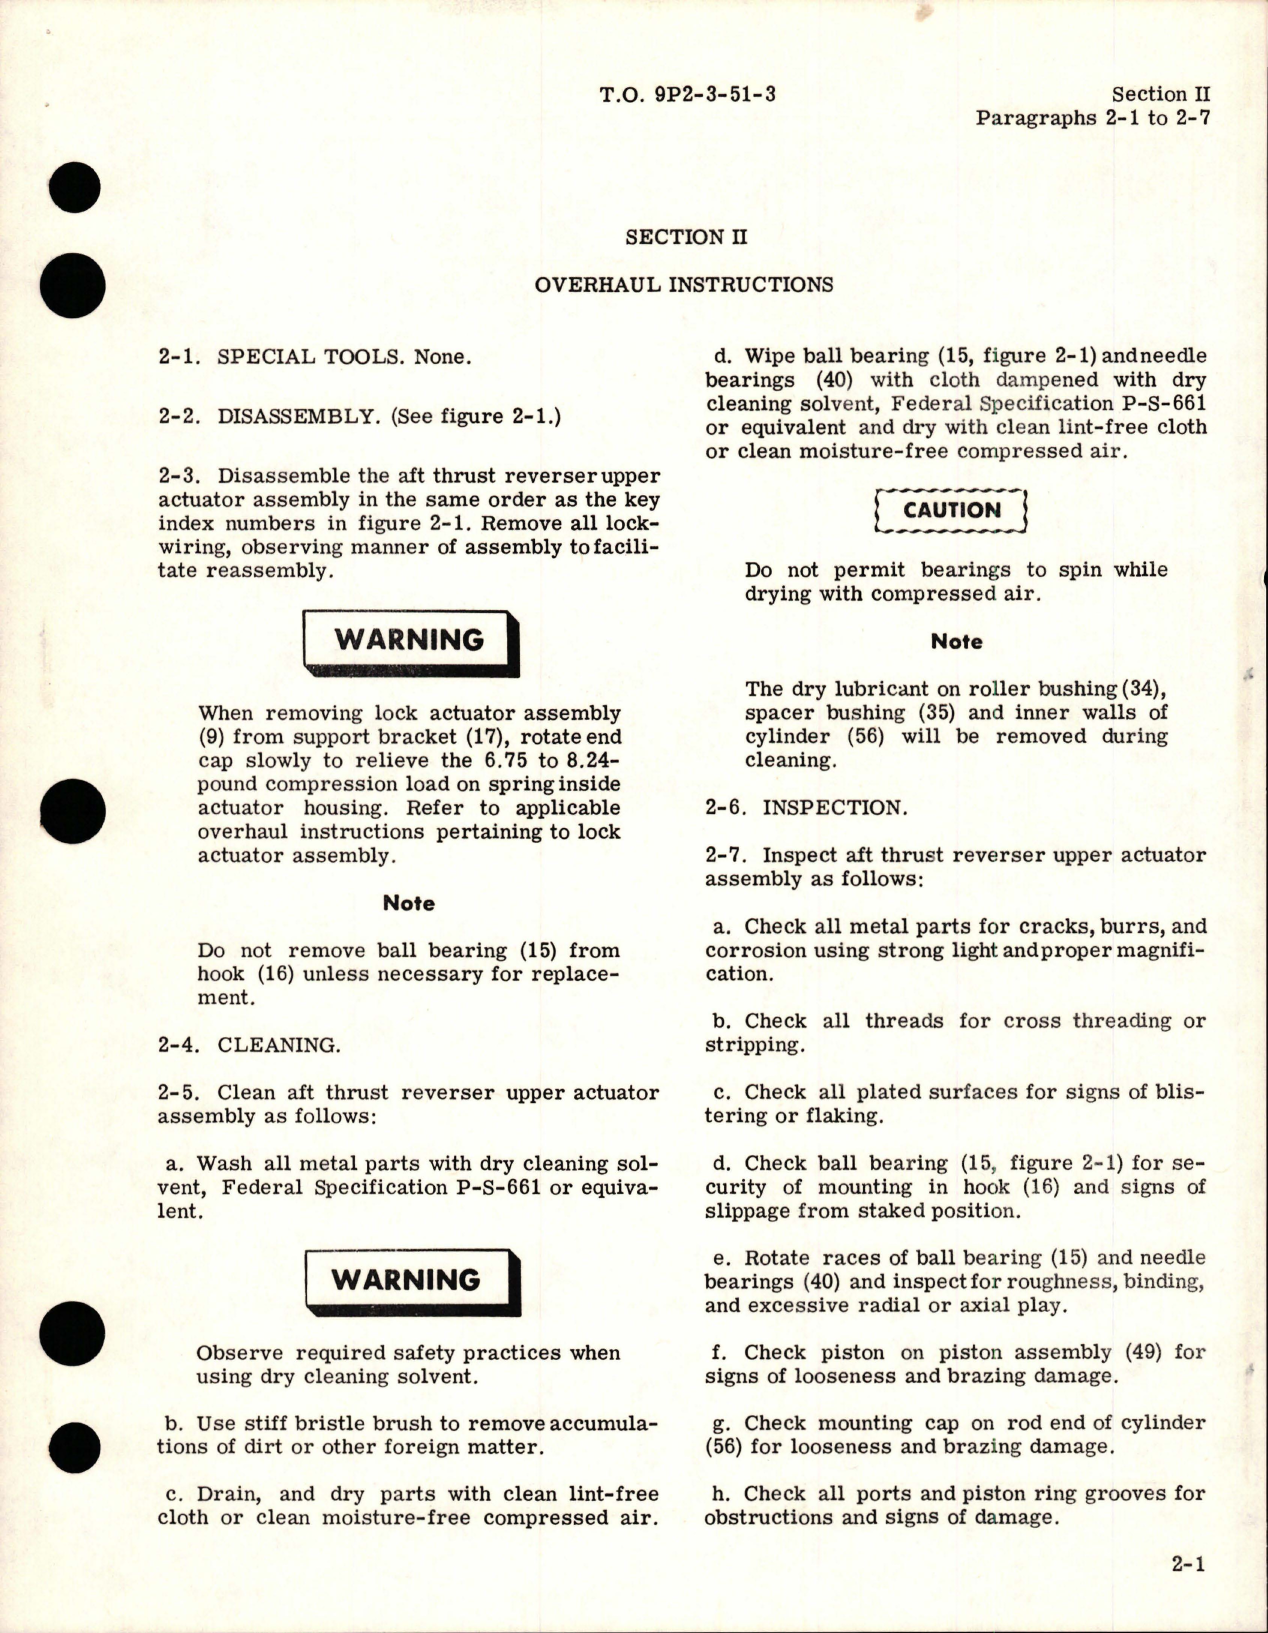 Sample page 7 from AirCorps Library document: Overhaul for AFT Thrust Reverser Upper Actuator Assembly - Part 65-10560-5